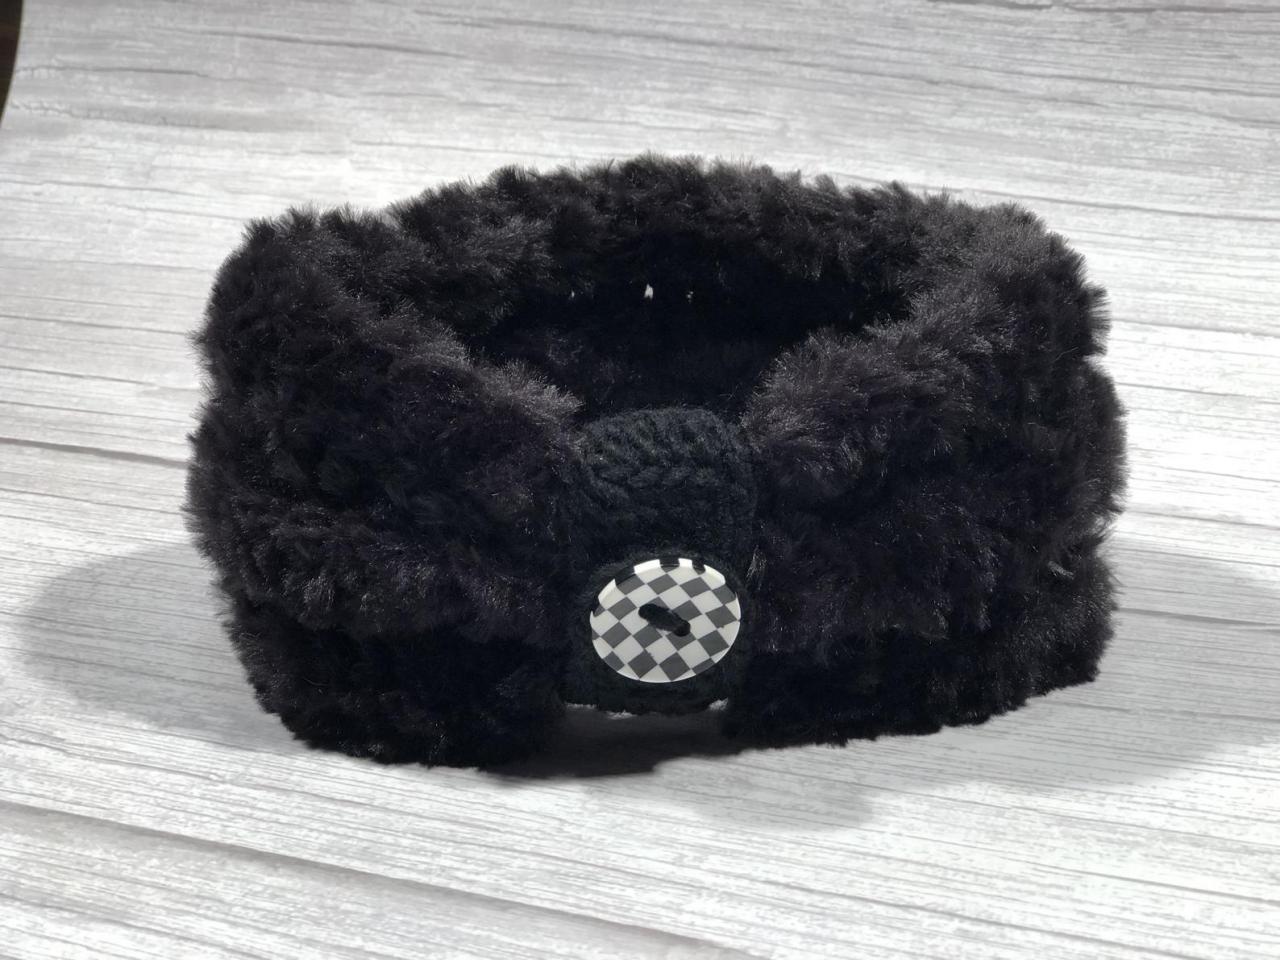 Crochet Earwarmer2 In 1 (with Or Without Button Ring), Adult Headband, Teen Headband, Soft Fake Furr